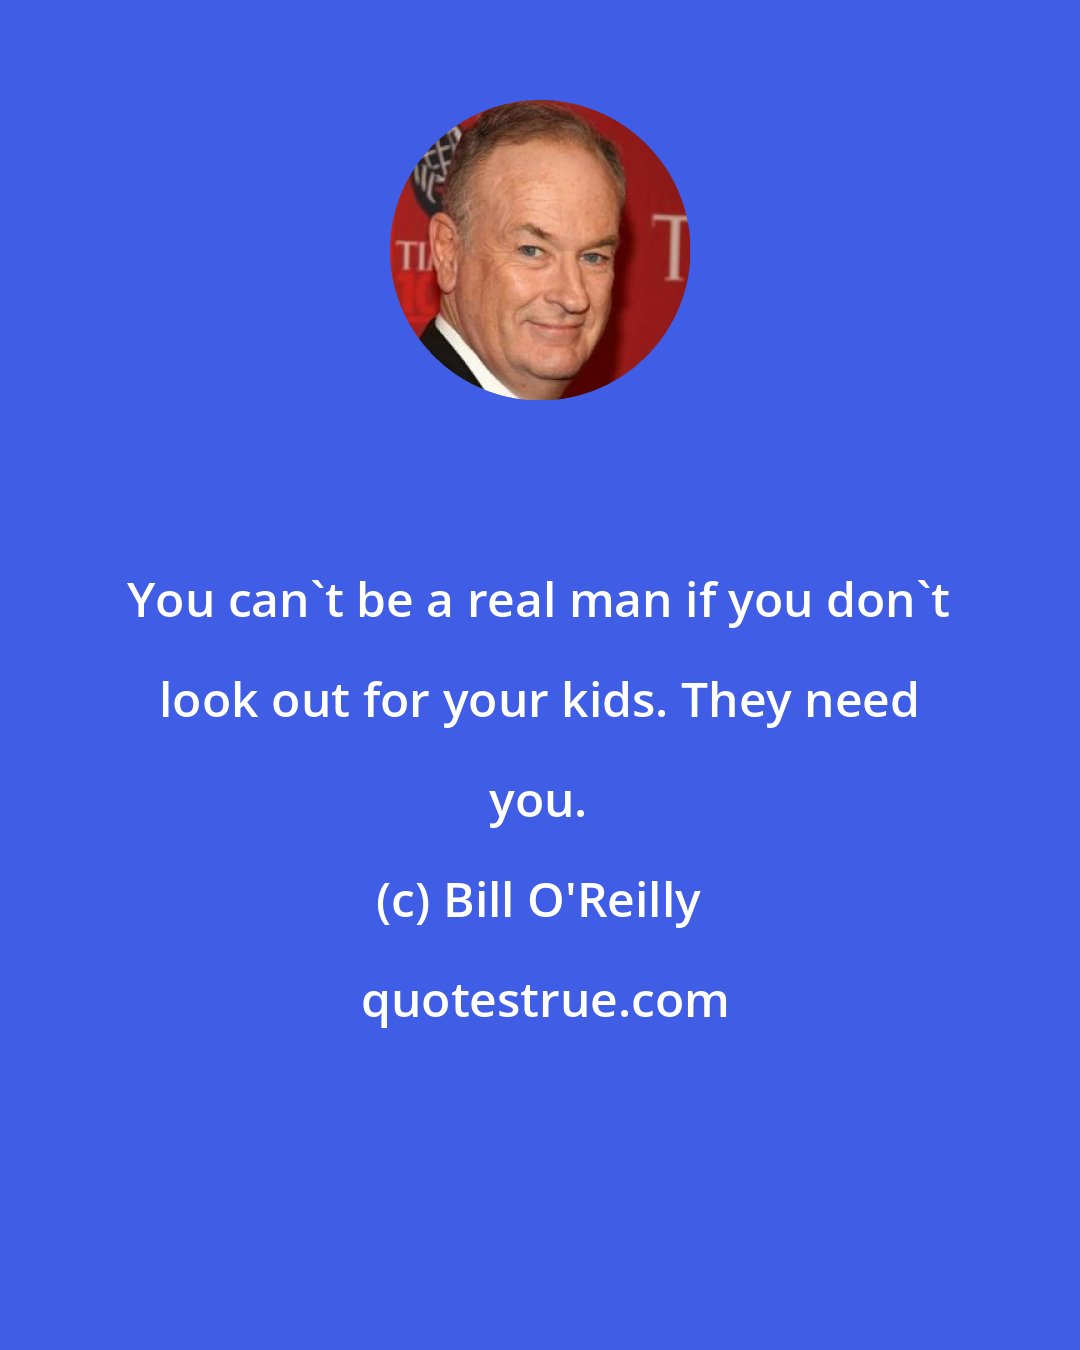 Bill O'Reilly: You can't be a real man if you don't look out for your kids. They need you.